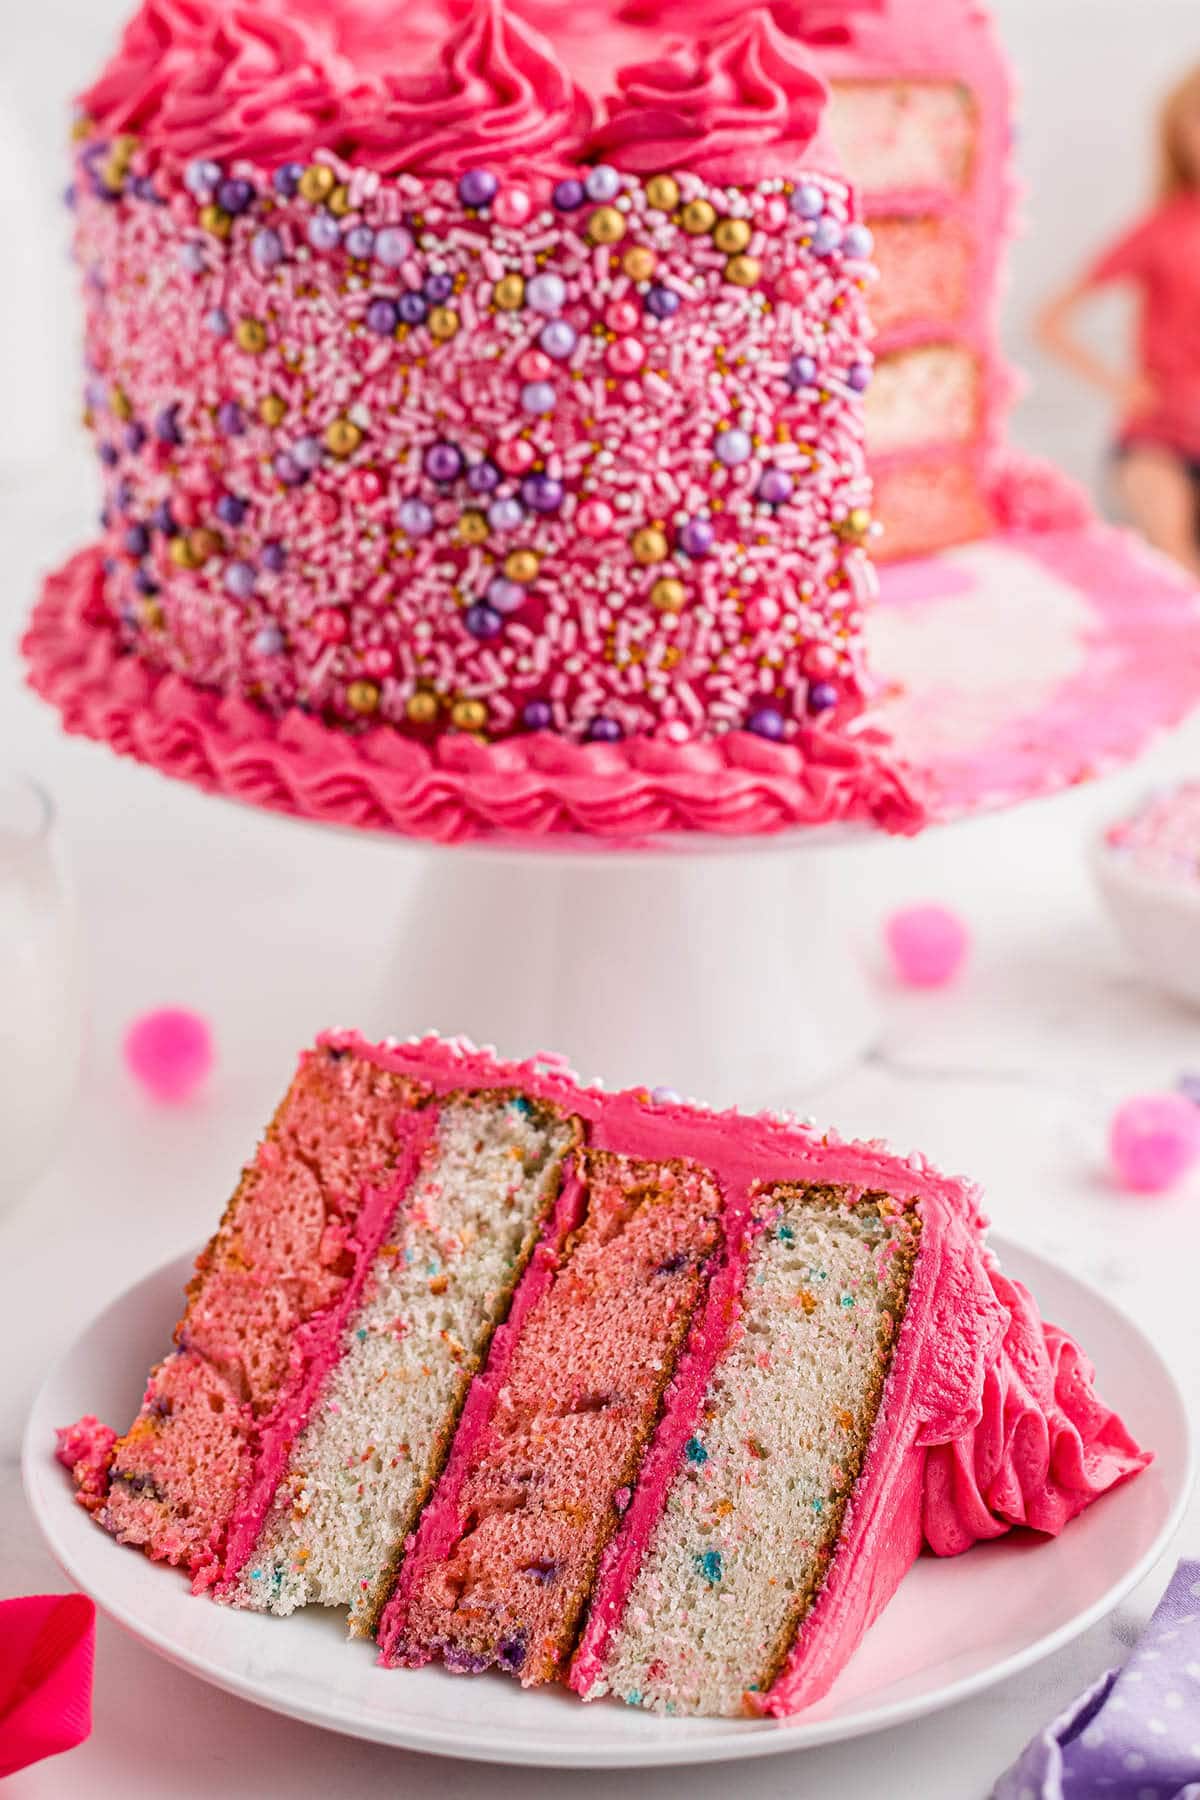 Slice of pink and white funfetti layer cake on a plate, with cake on a cakestand behind it.